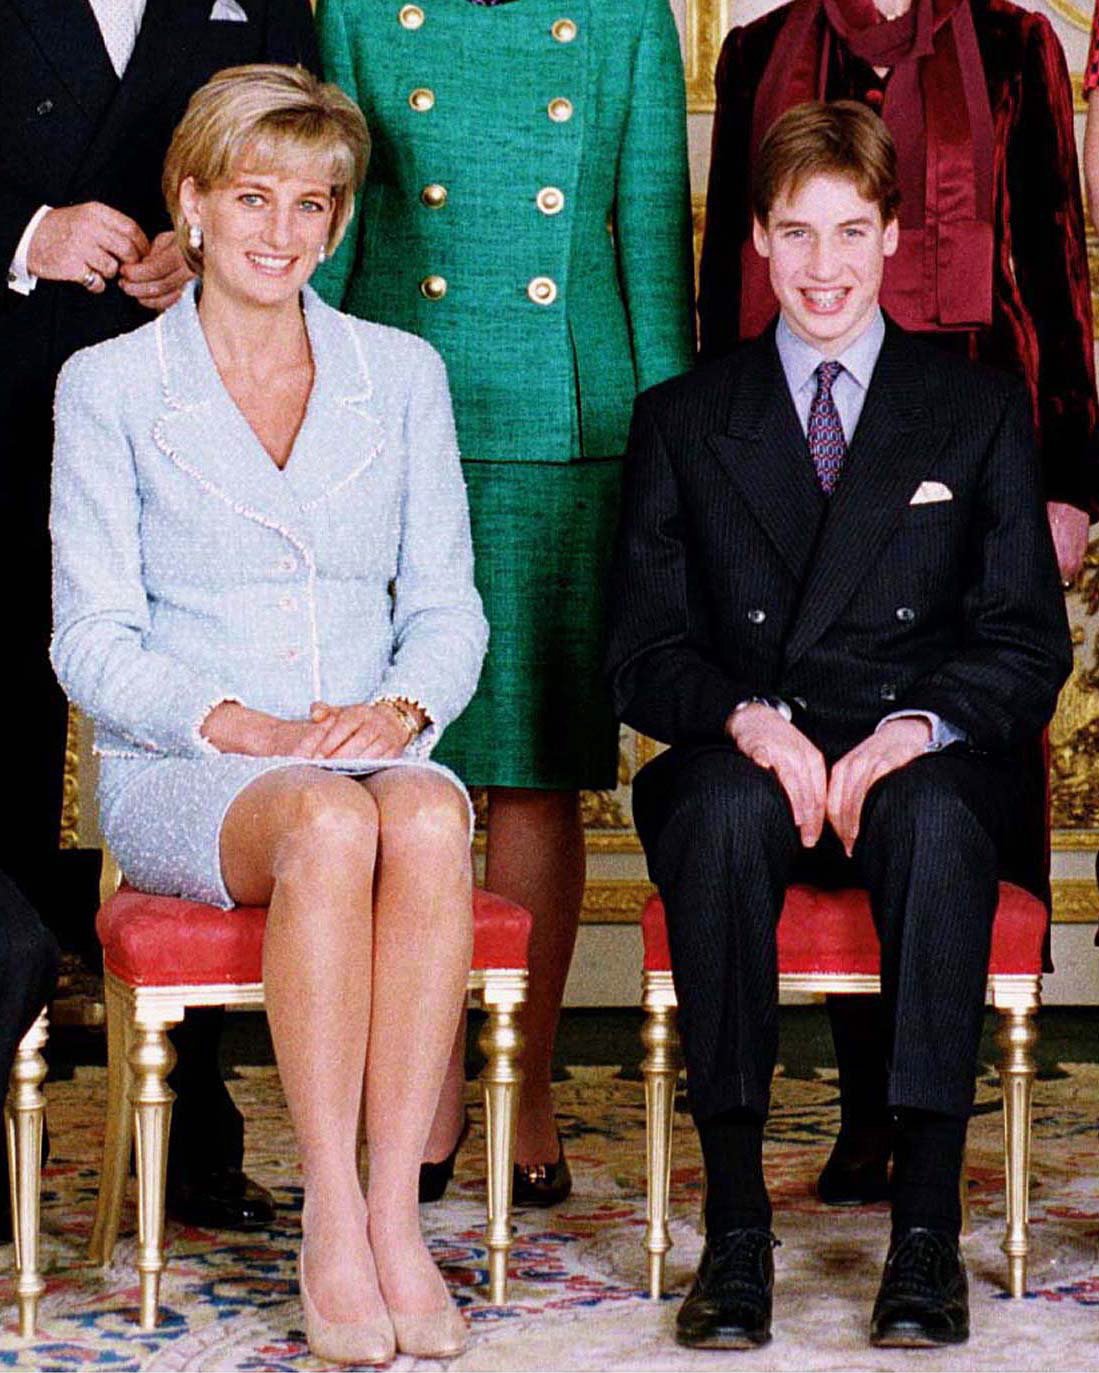 Prince William At Confirmation With Prince Charles And Princess Diana At Windsor Castle, Windsor, United Kingdom. | Source: Getty Images